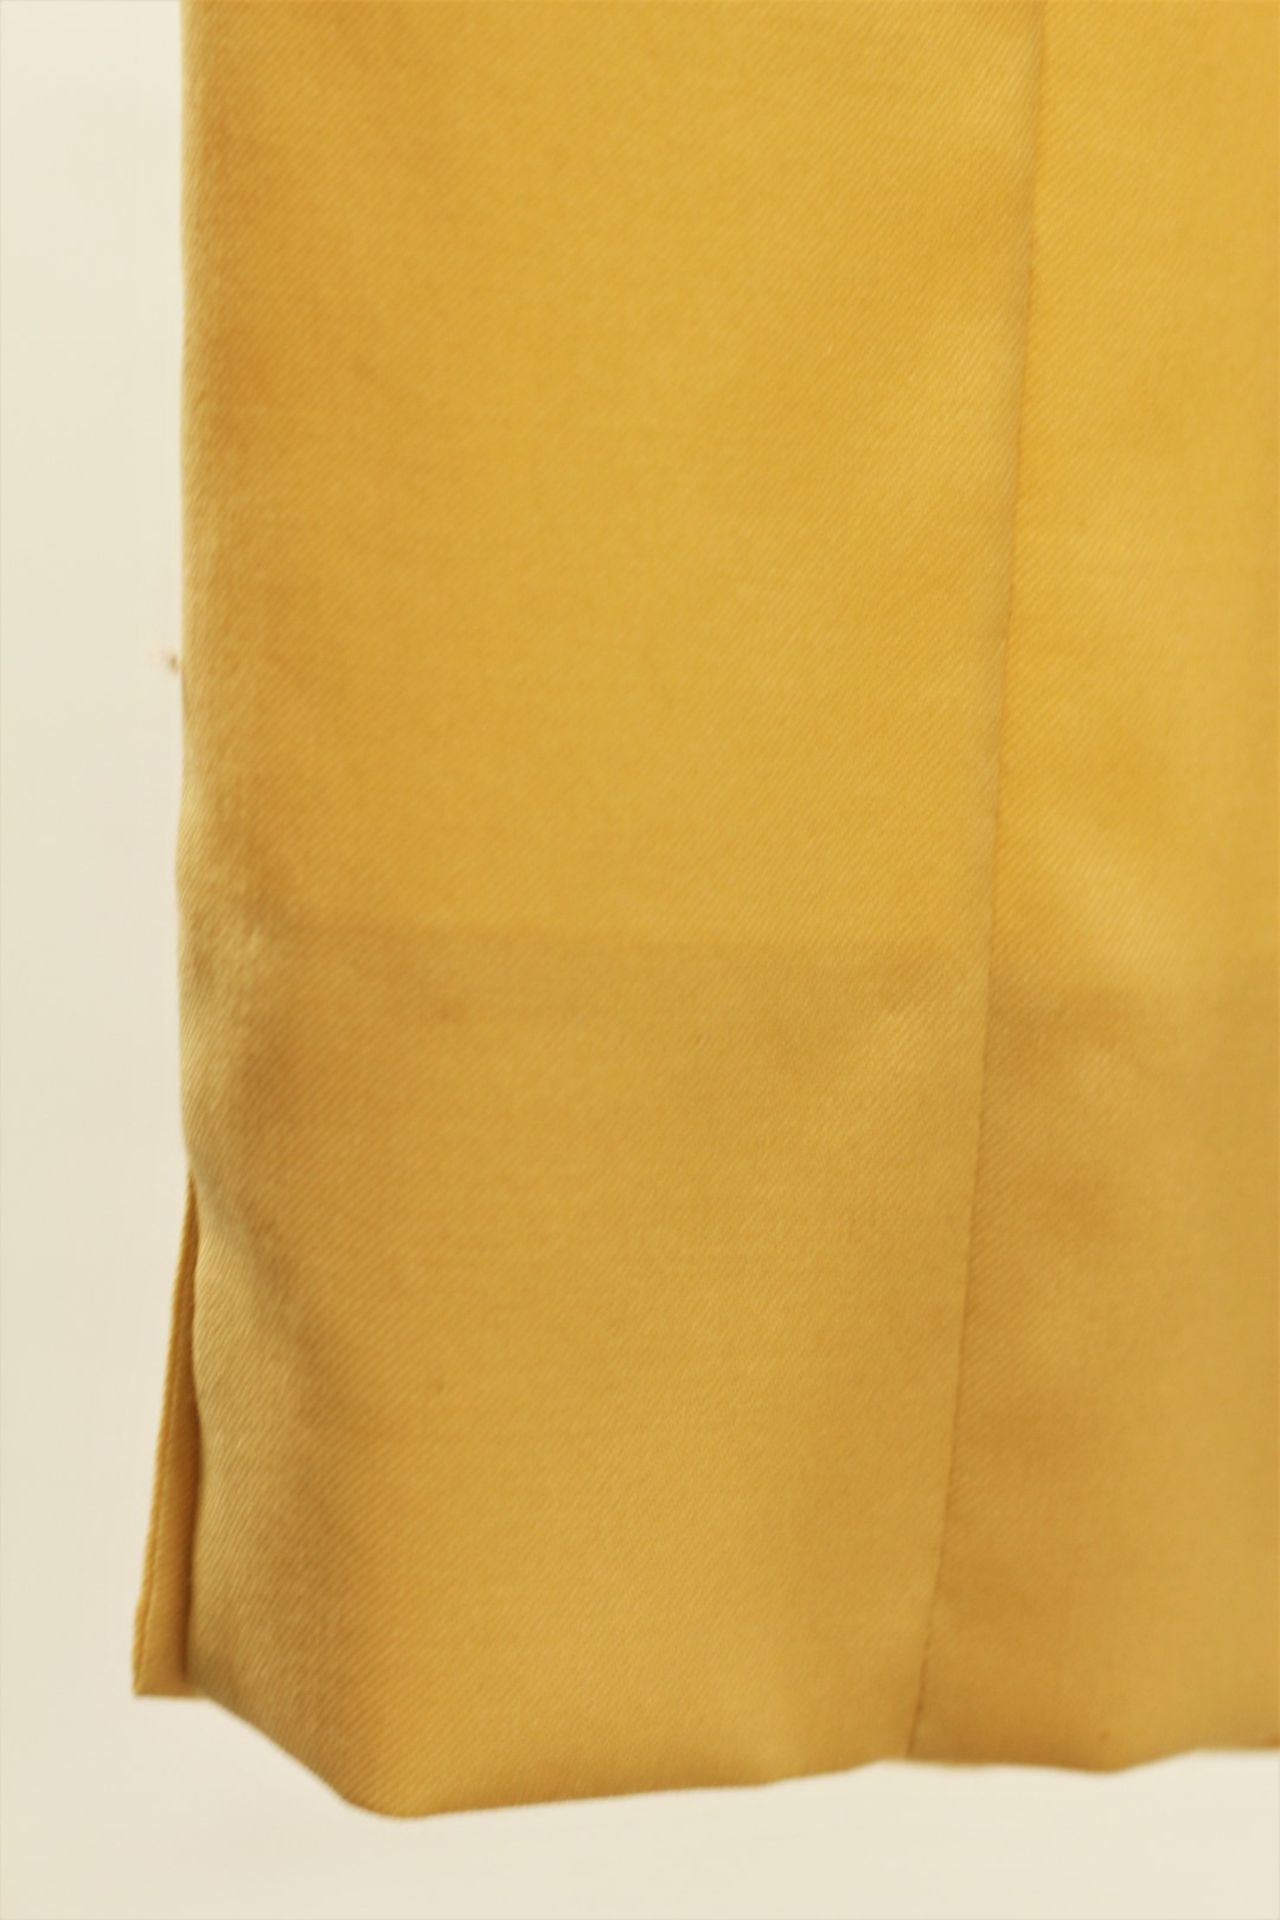 1 x Artico Cream Trousers - Size: 18 - Material: 100% Leather. Lining 50% viscose, 50% Acetate - - Image 9 of 9